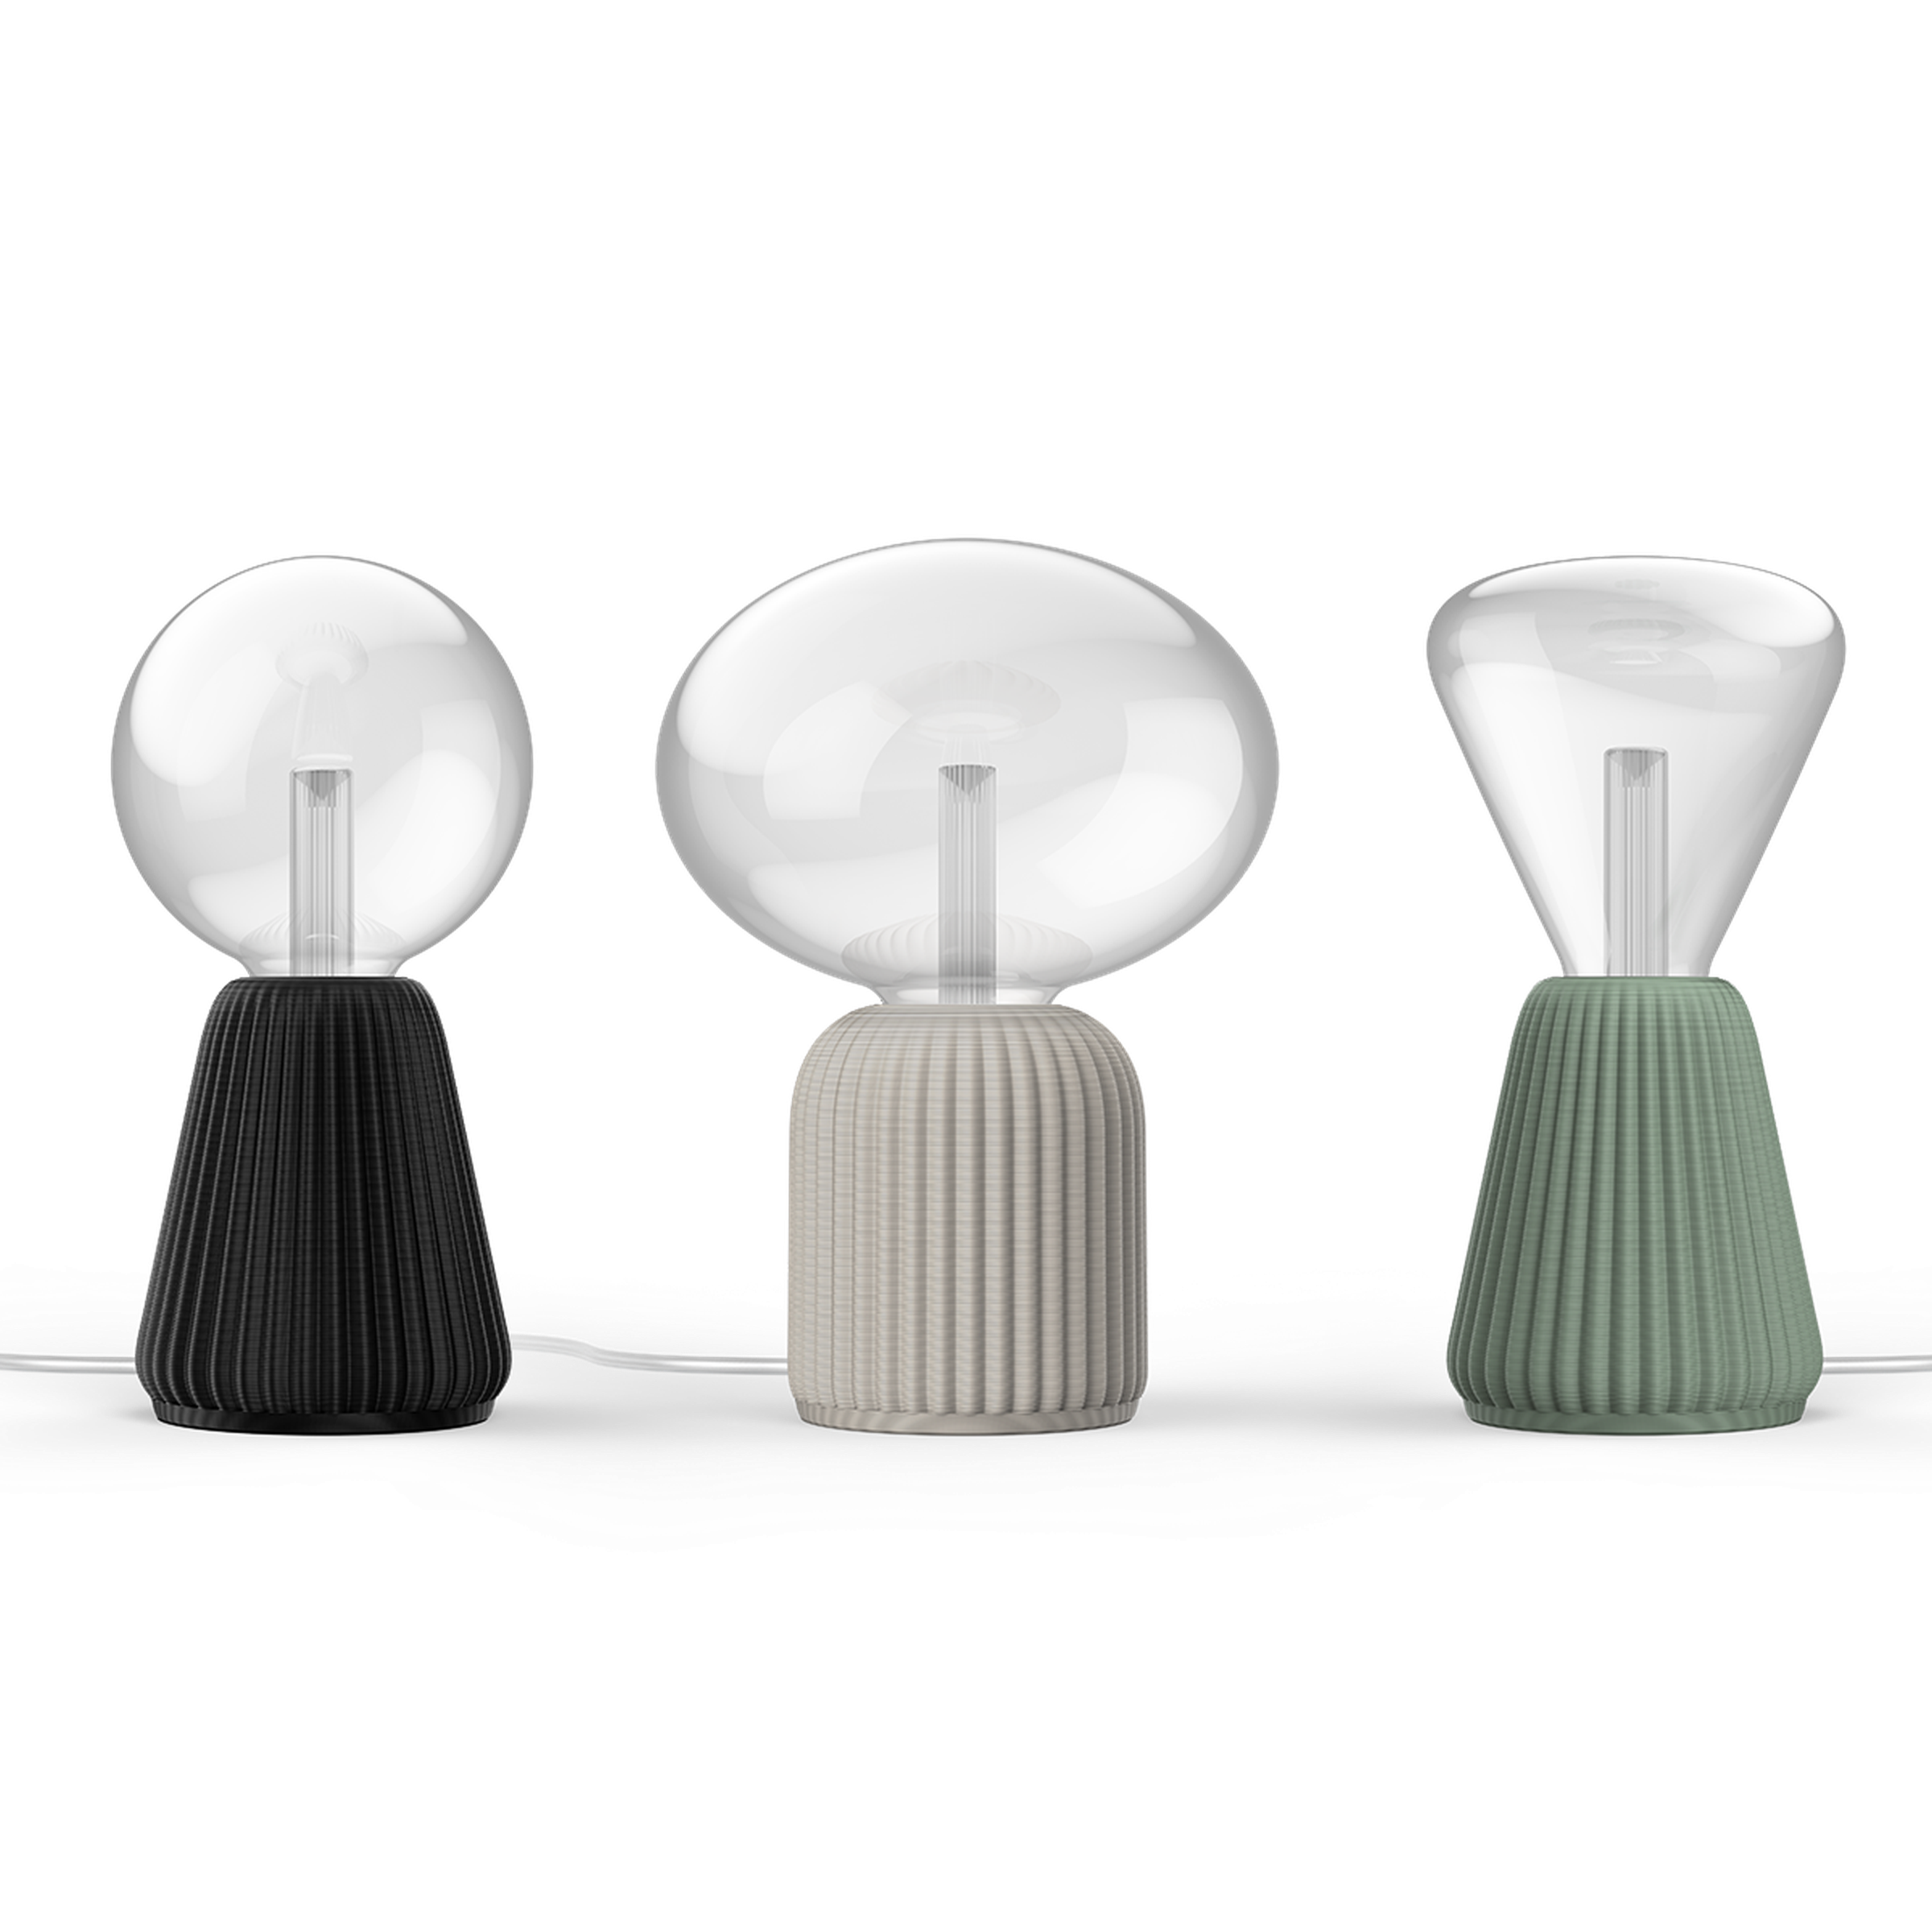 Three of the new Lightguide bulbs fitted into the new Cono lamp bases.